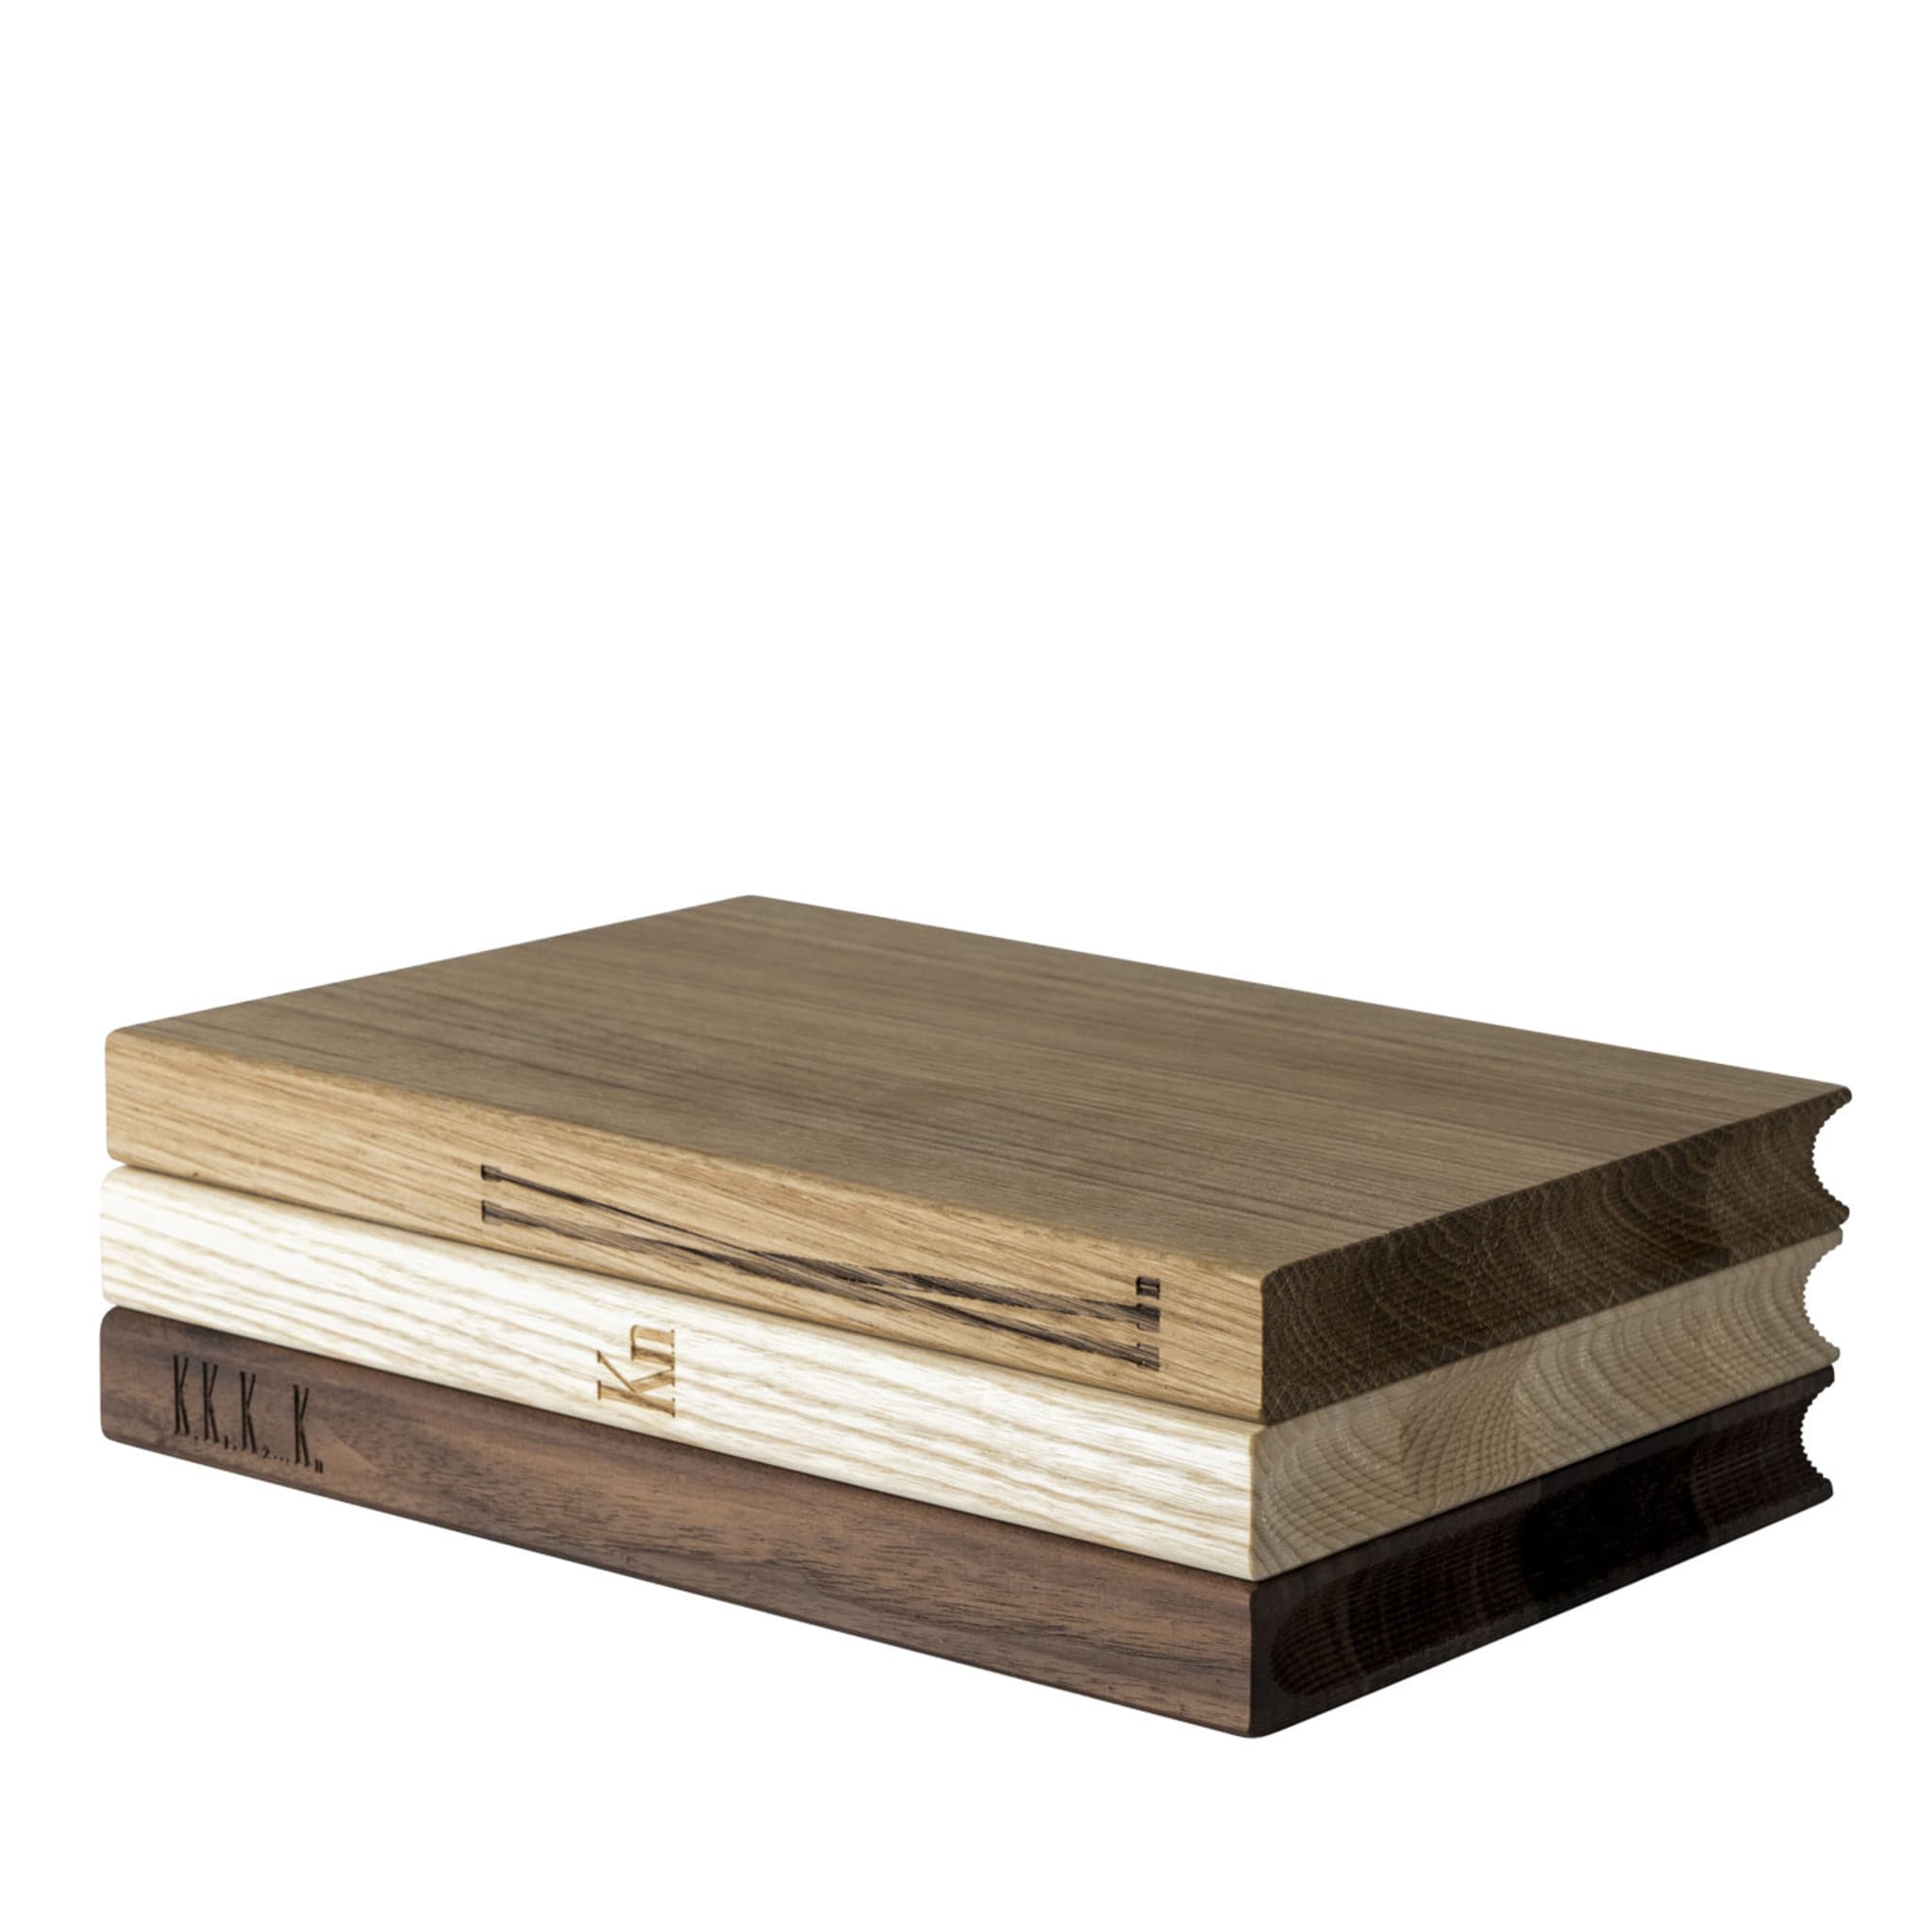 KN Book Set of 3 Cutting Boards by Roberto Vaia - Main view